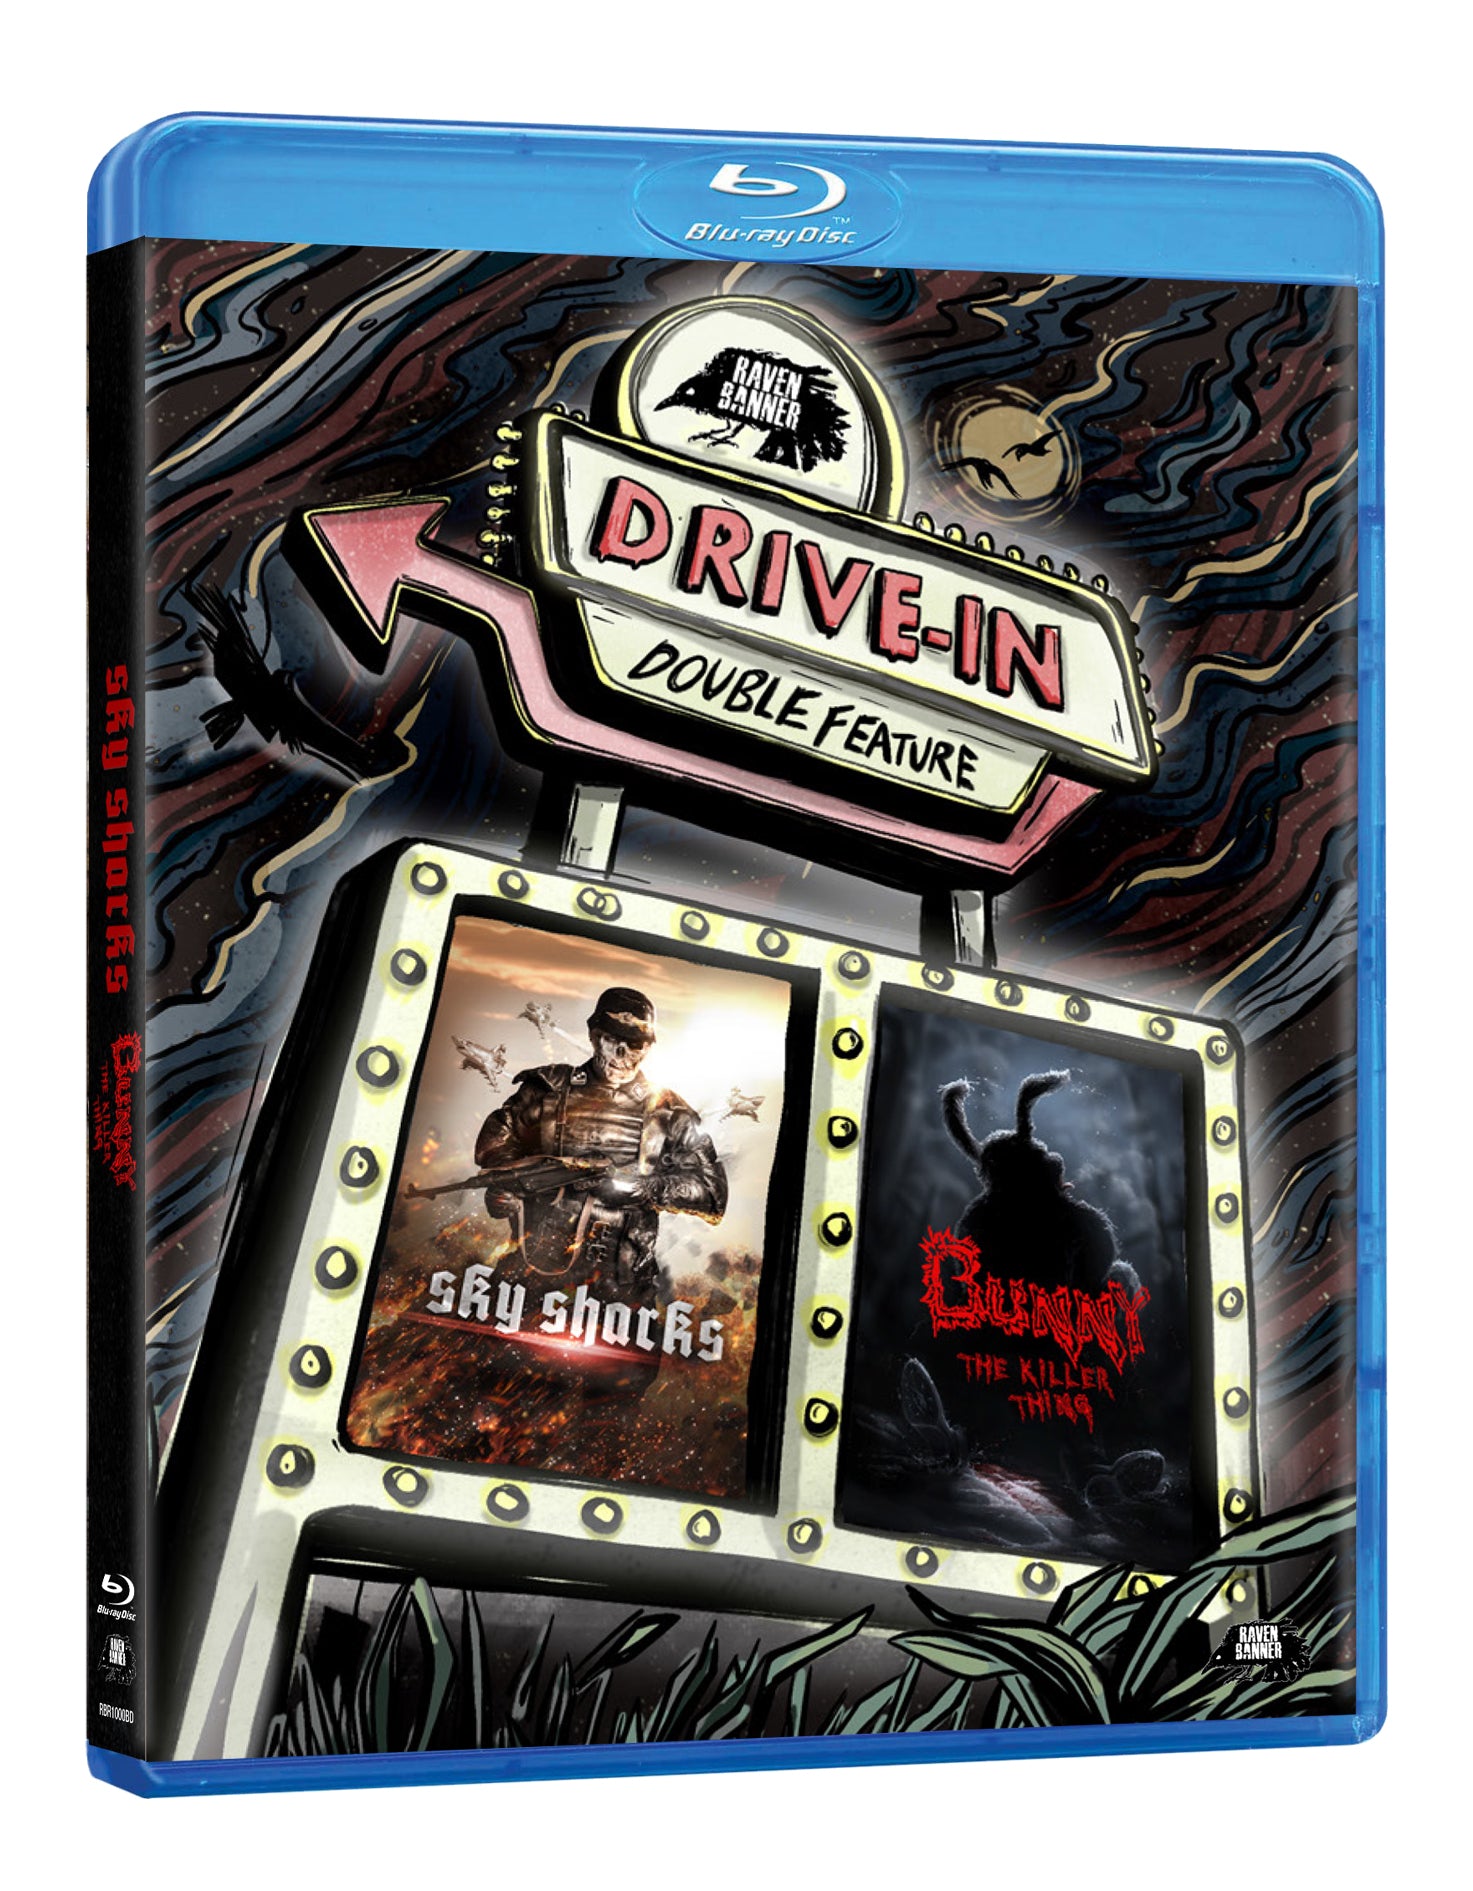 SKY SHARKS & BUNNY THE KILLER THING - DRIVE-IN DOUBLE FEATURE (BLU-RAY)